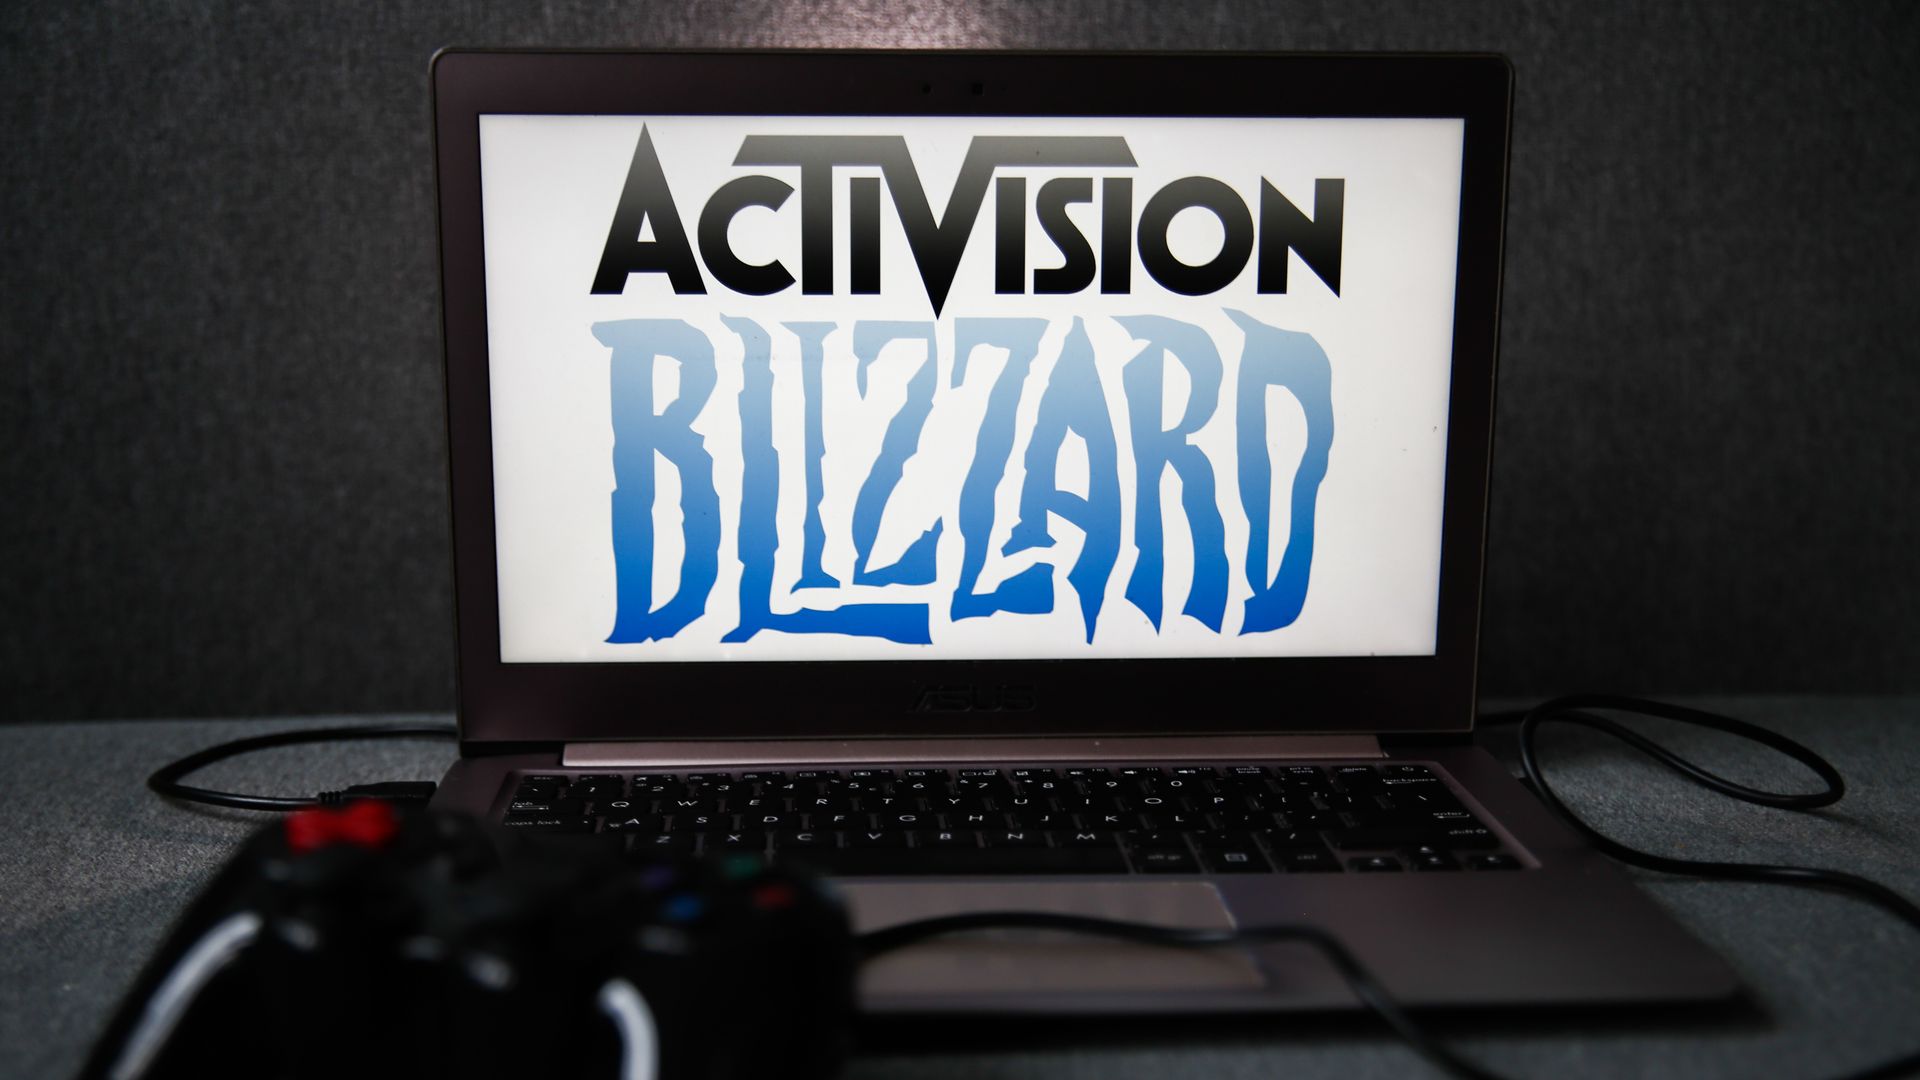 Photo illustration of the Activision Blizzard logo on a computer screen